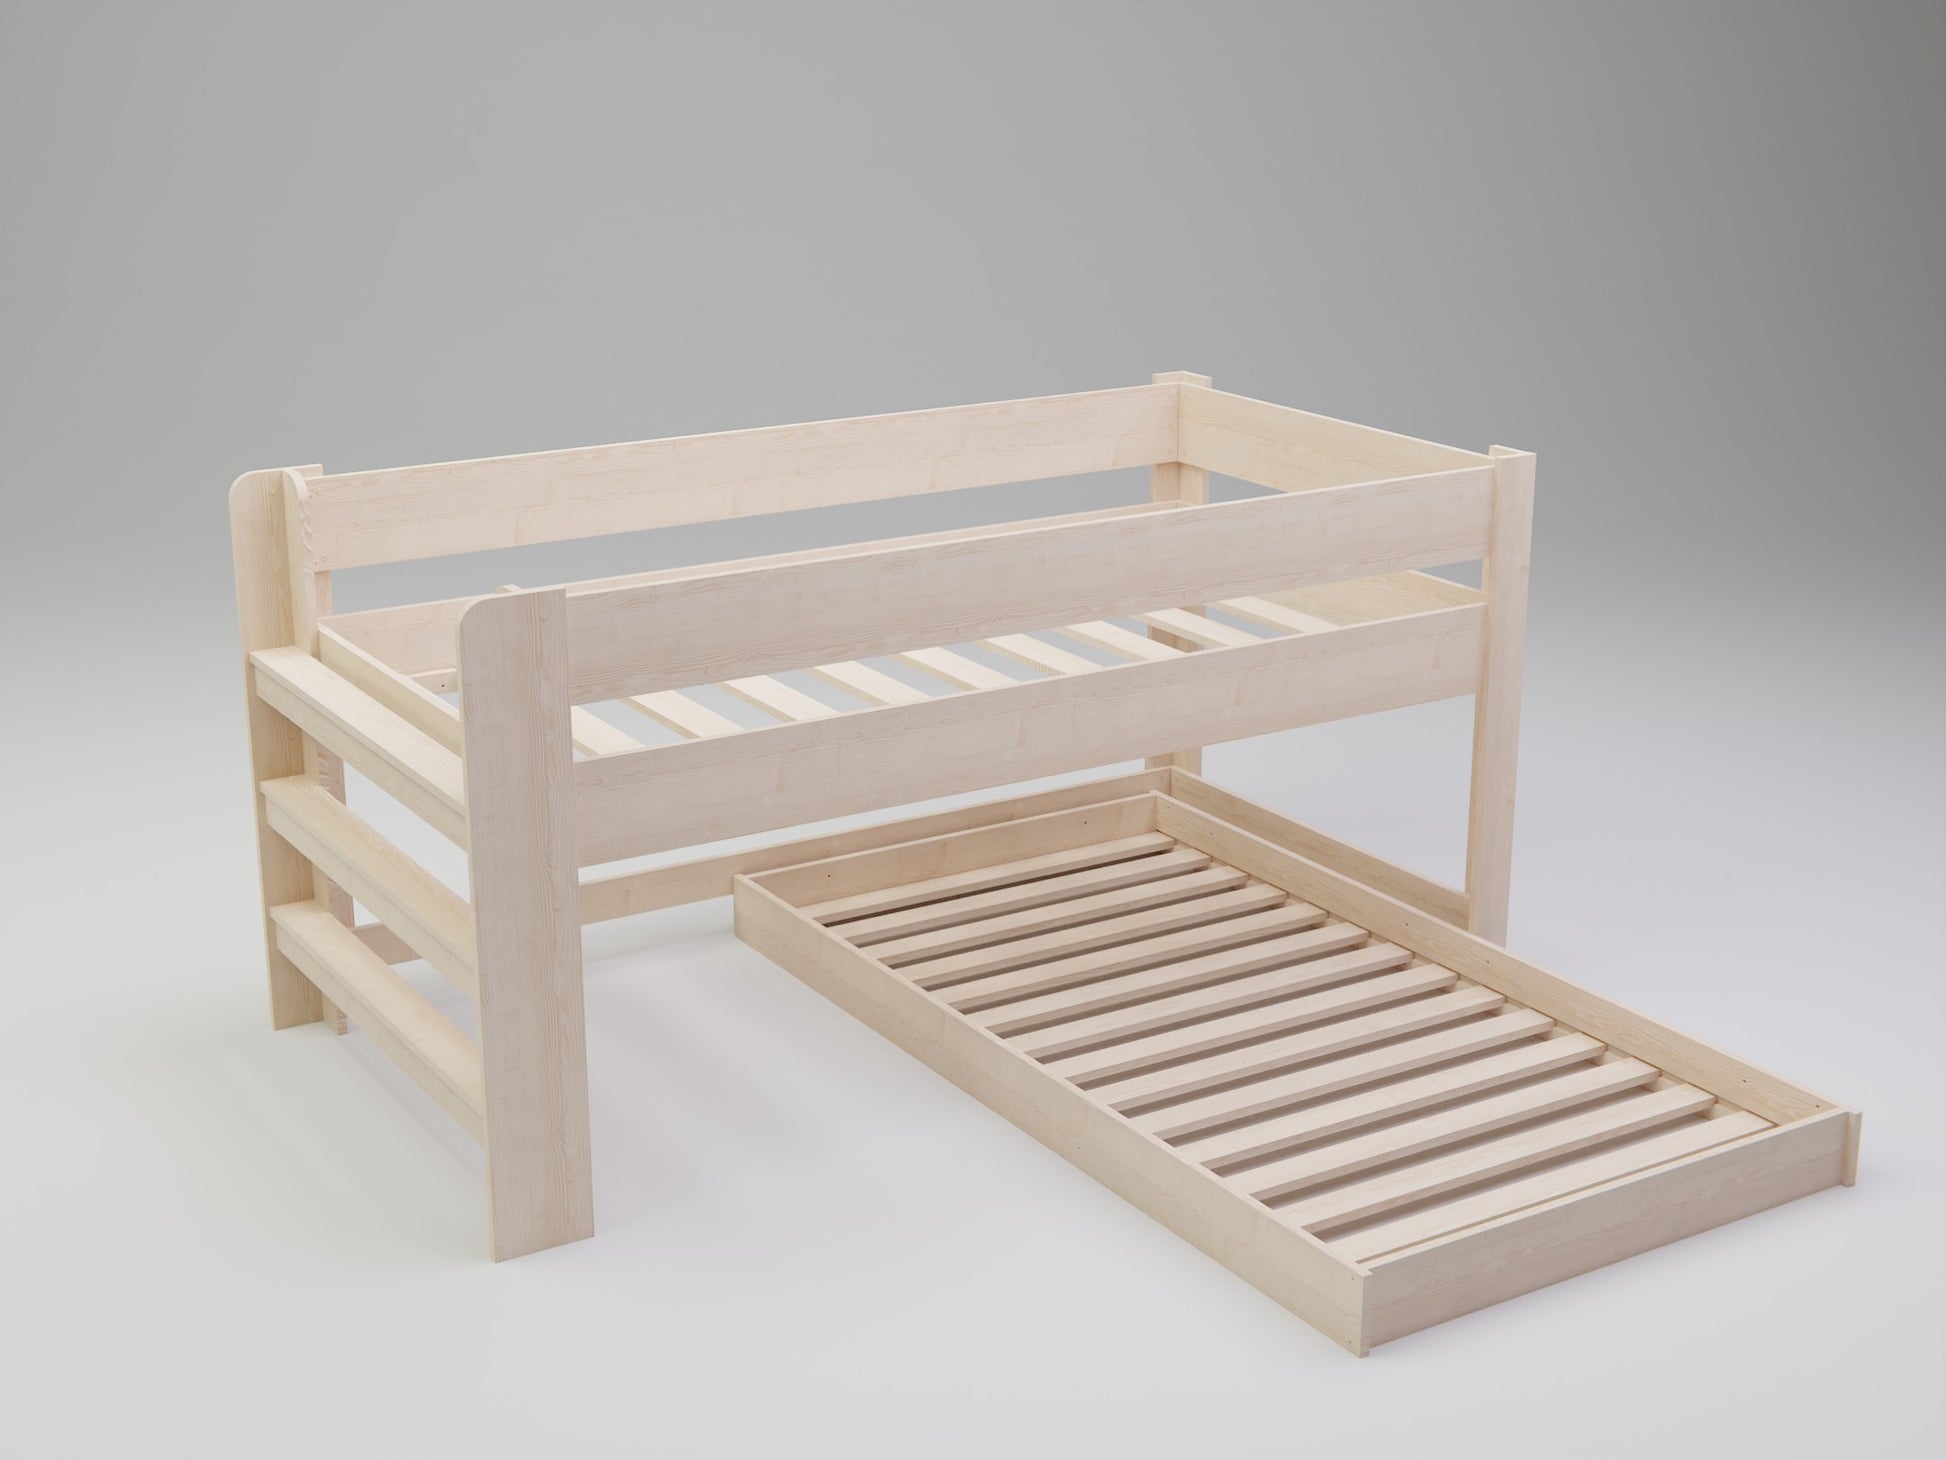 Our L-Shape Bunk Bed Combo: The ultimate L shaped bed perfect for siblings, combining style with functionality.